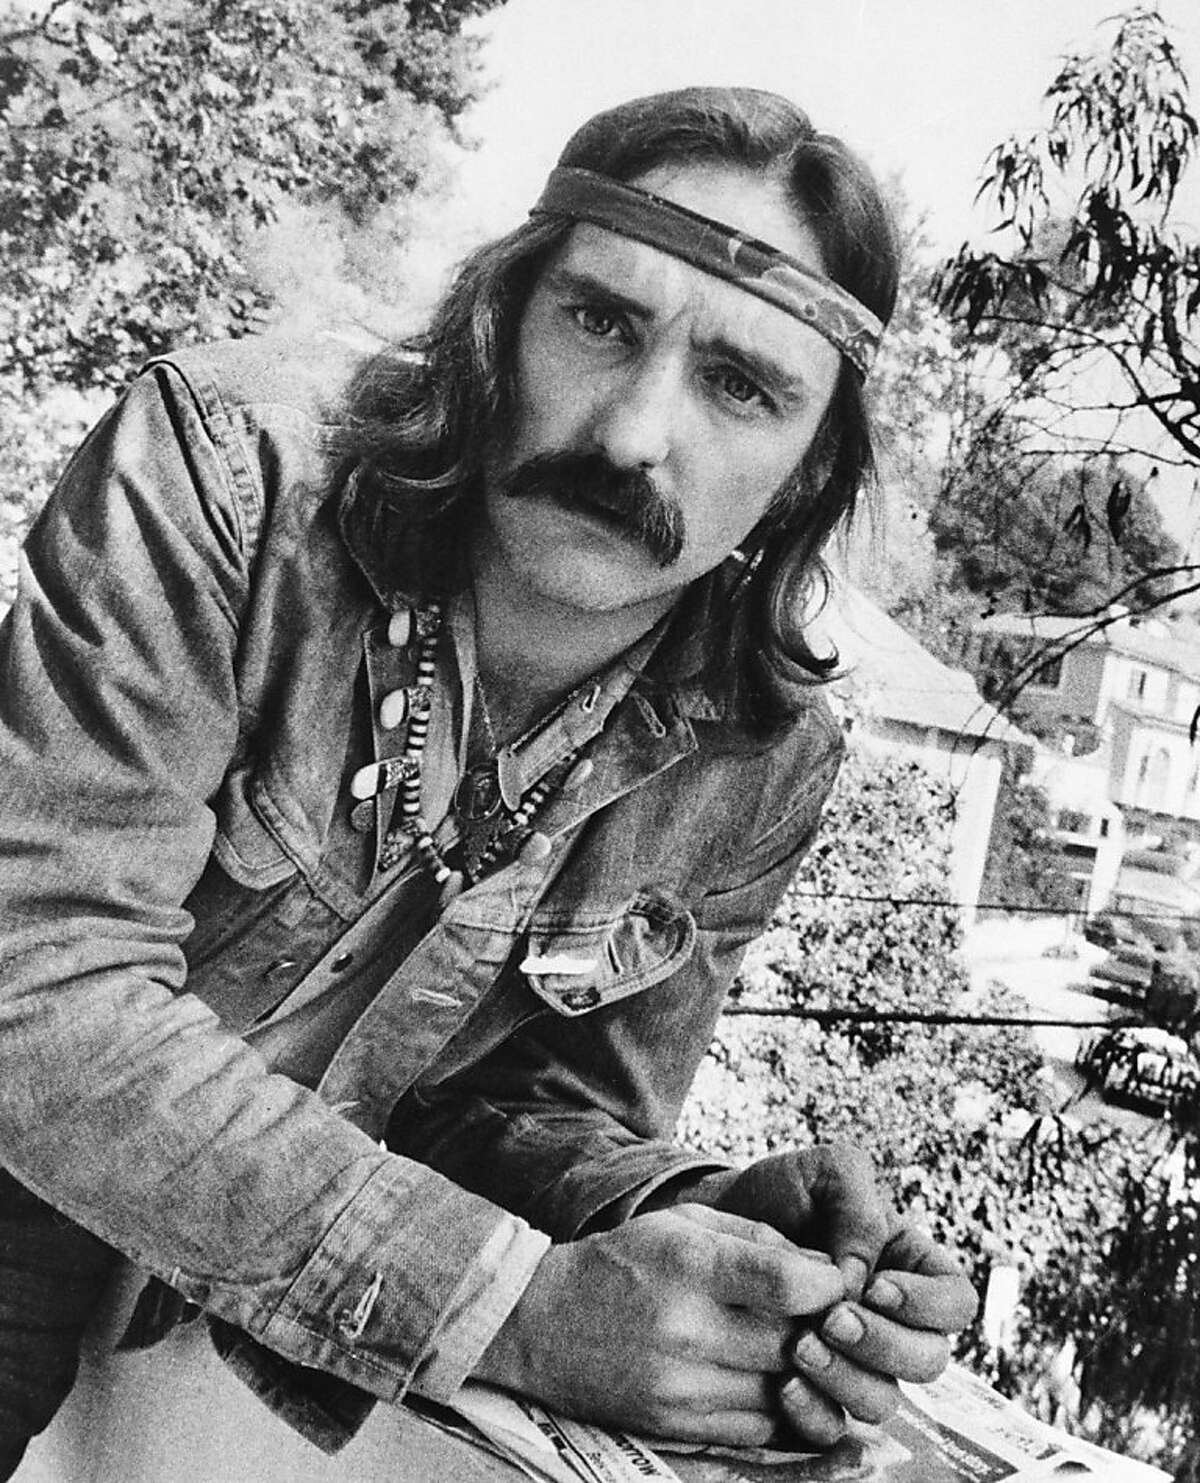 FILE - In a Oct. 1971 file photo, director-actor Dennis Hopper poses in Hollywood, Ca. Hopper, the Hollywood actor-director whose memorable career included the 1969 smash "Easy Rider," died Saturday, May 29, 2010 at his Venice, Calif. home. He was 74. (AP Photo, File) Ran on: 05-30-2010 Two years after Easy Rider, Mr. Hopper looked as if he was still on the set of his best-known film.